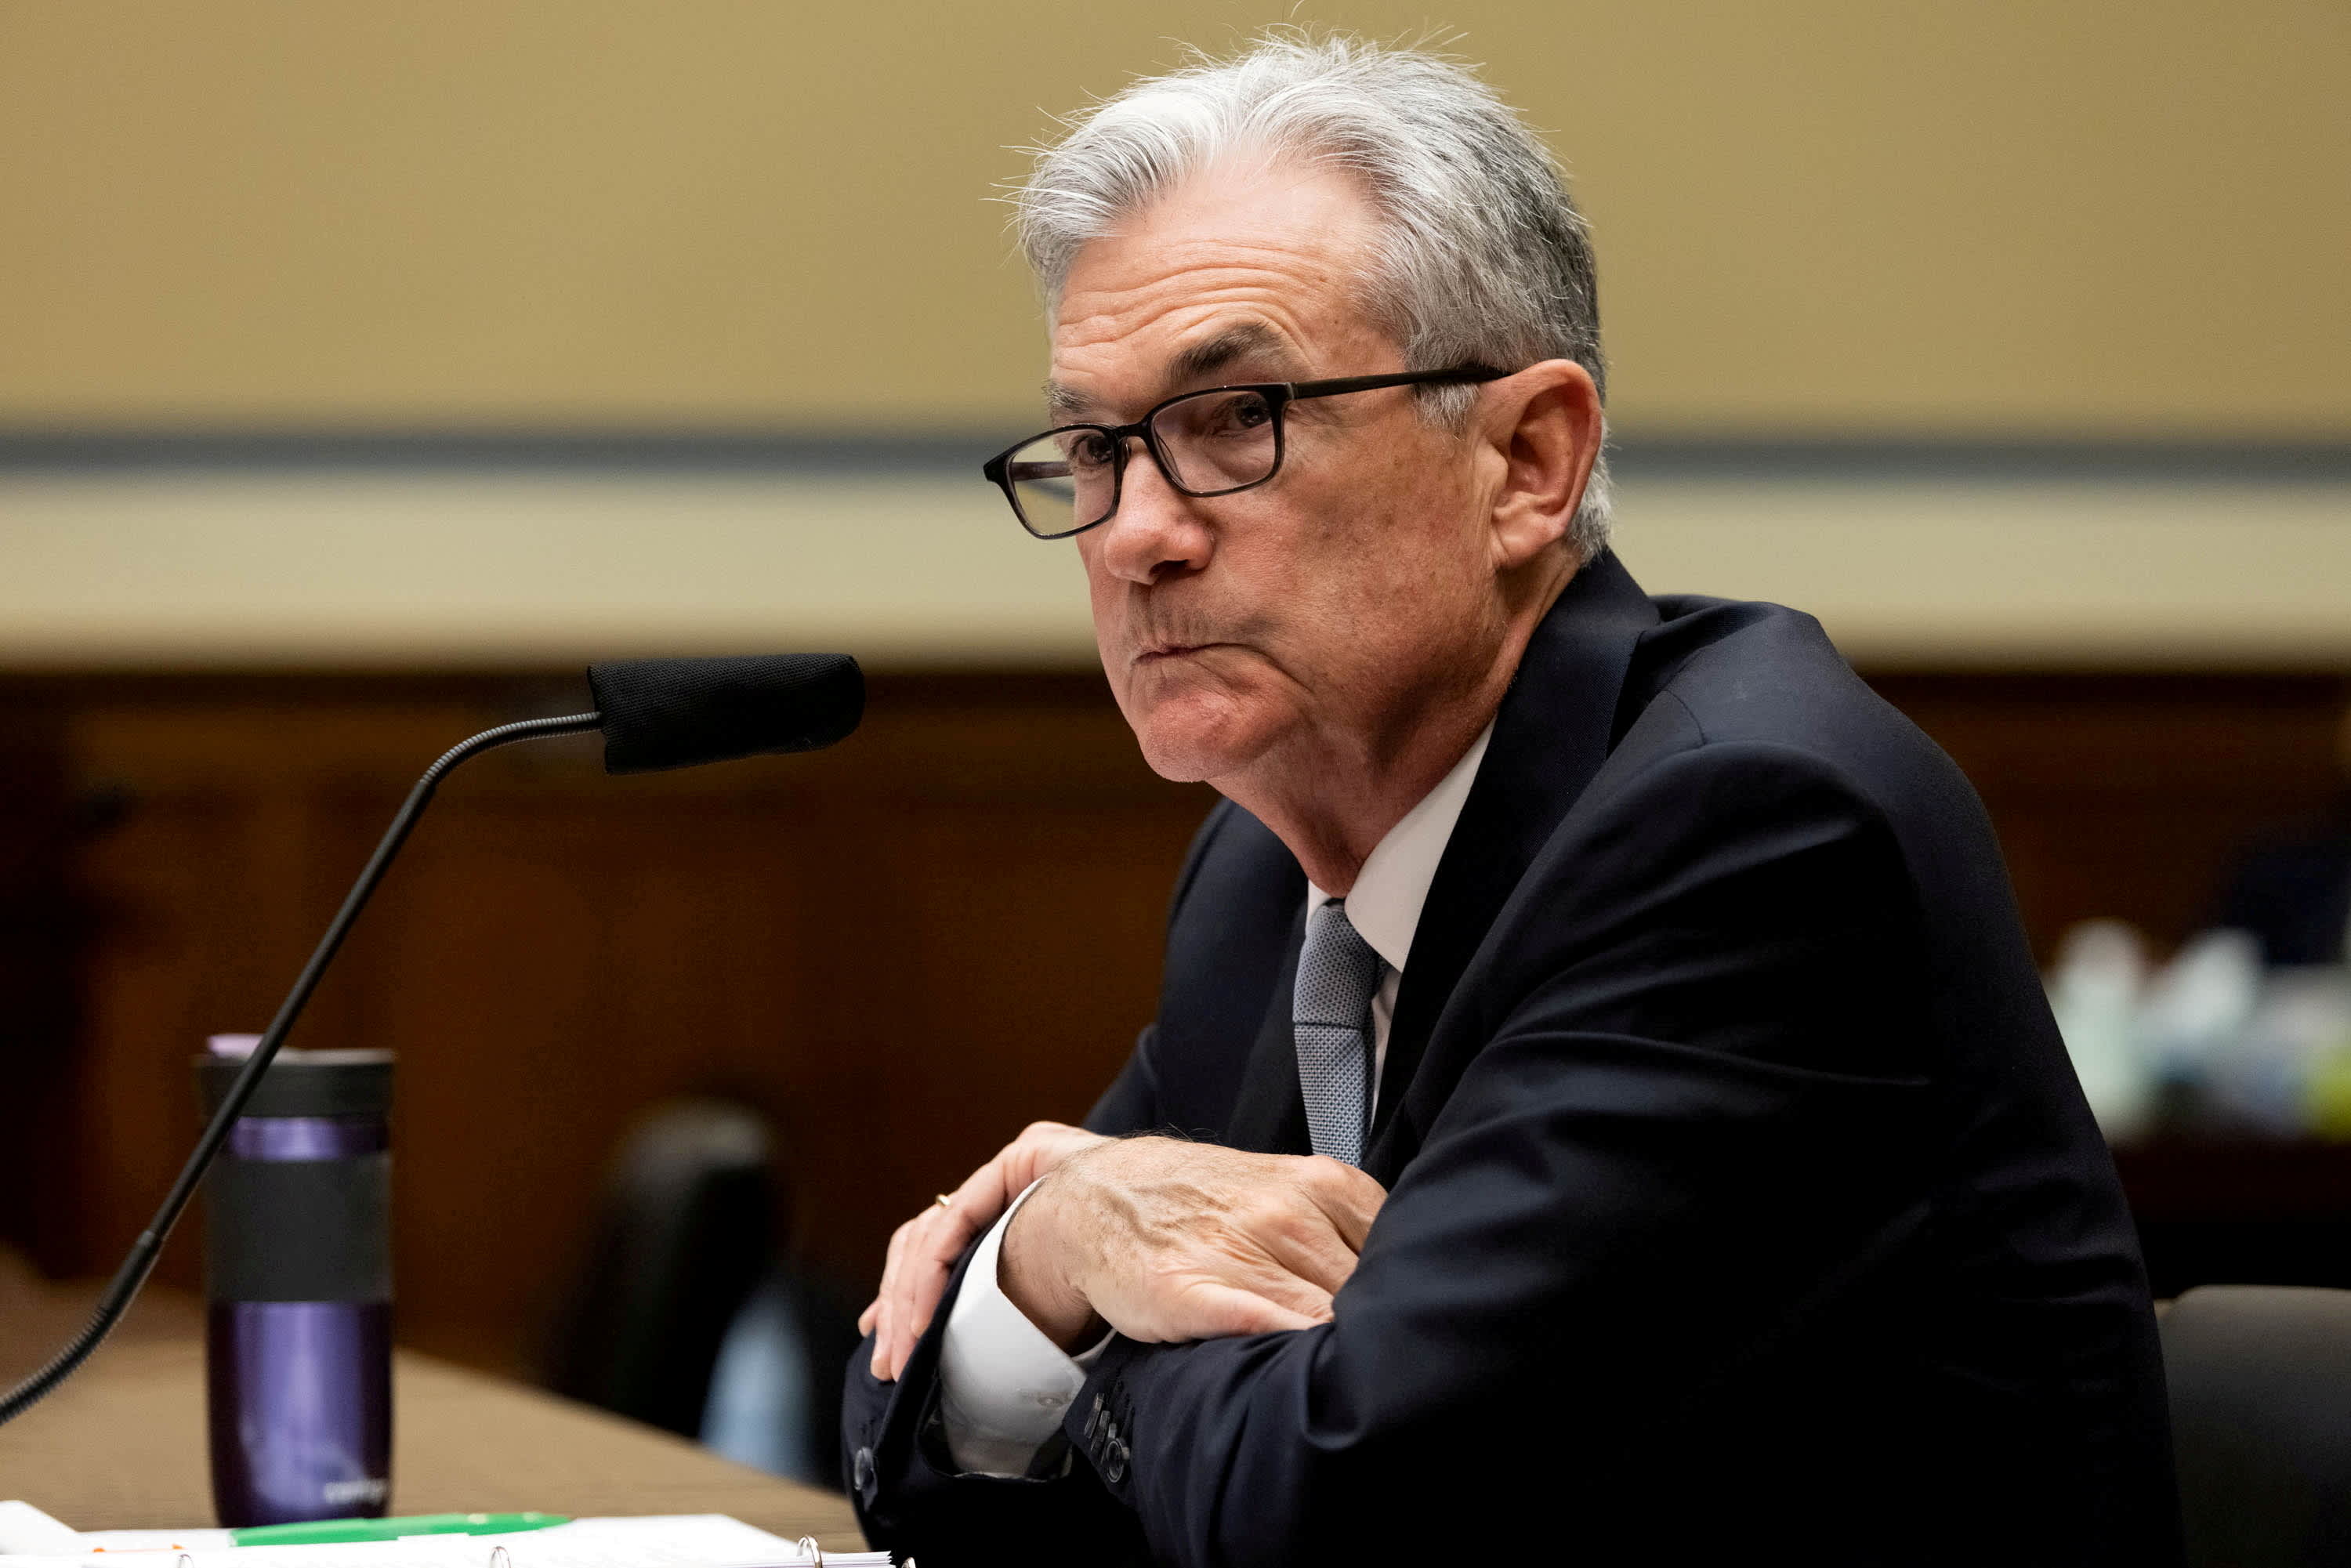 The Fed will change trading rules for officials to keep public’s trust after controversy, Powell says